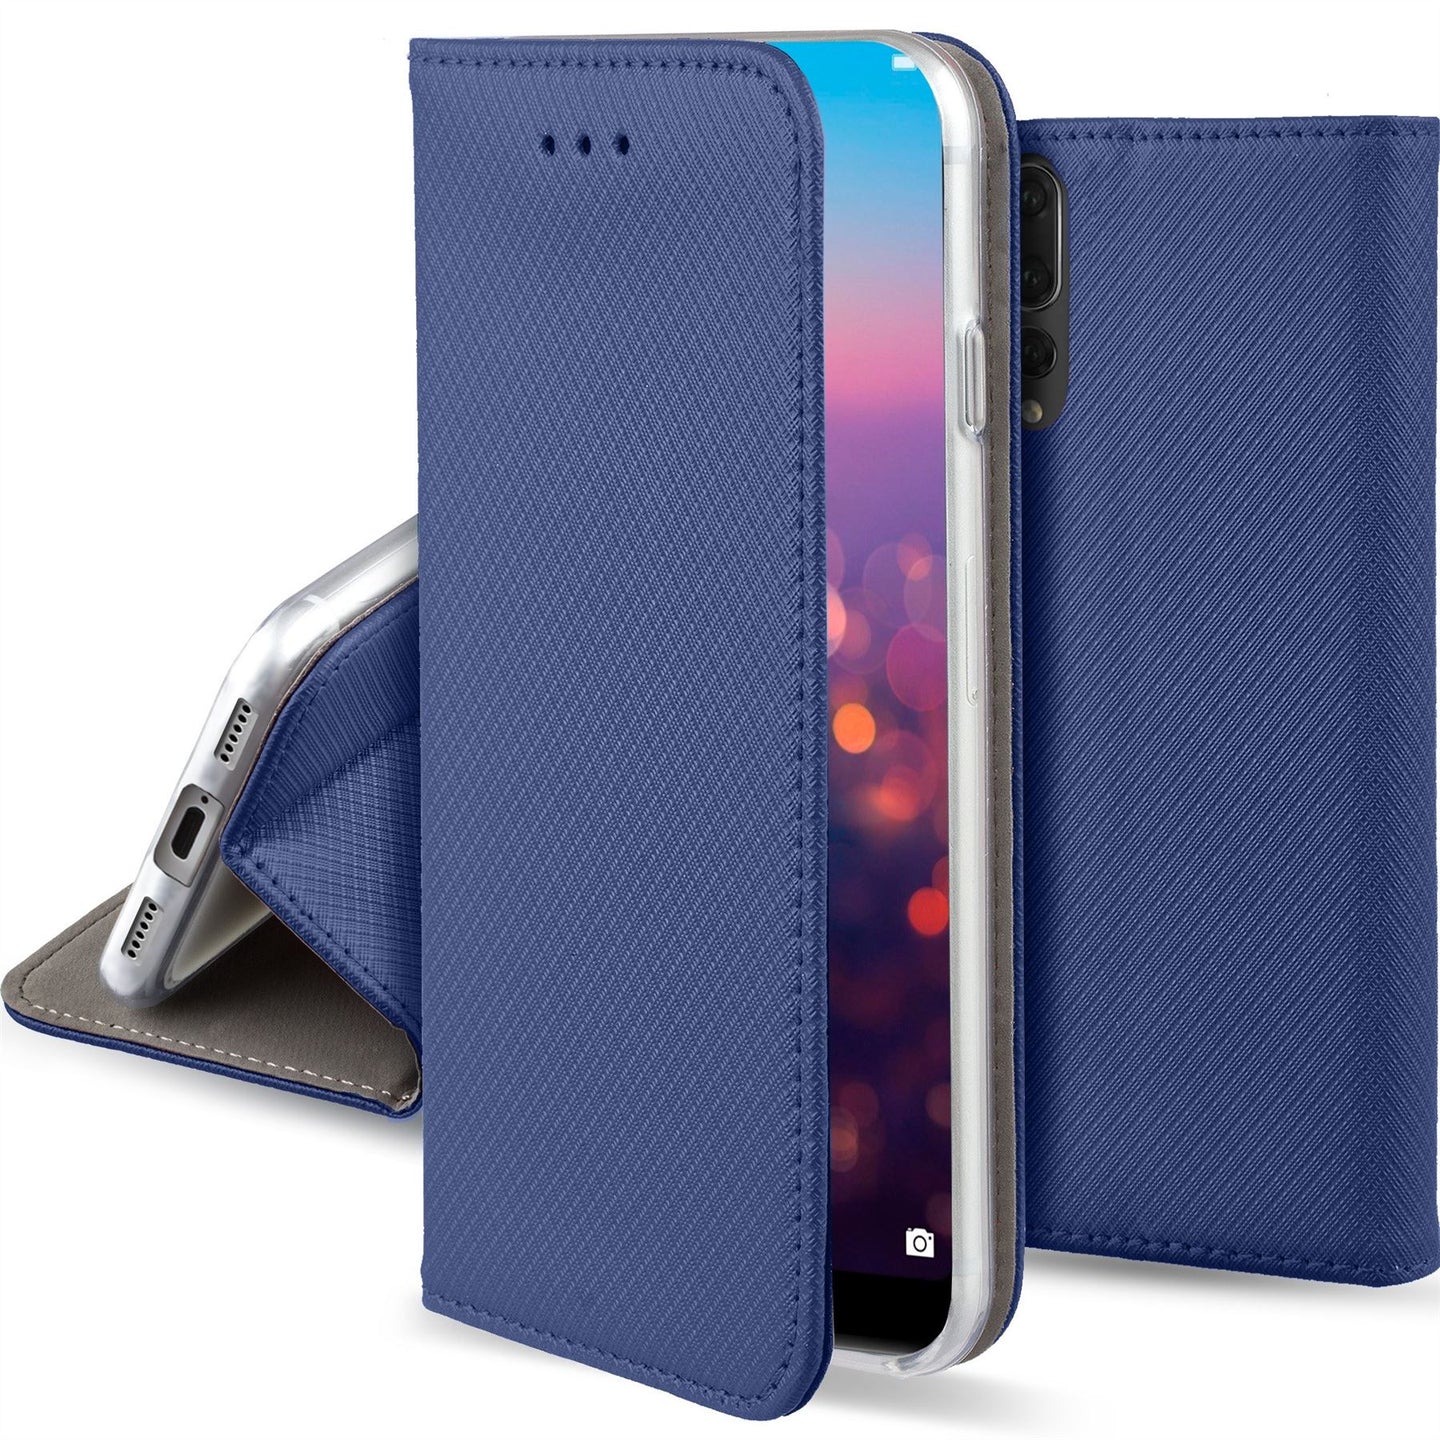 Moozy Case Flip Cover for Huawei P20 Pro, Dark Blue - Smart Magnetic Flip Case with Card Holder and Stand